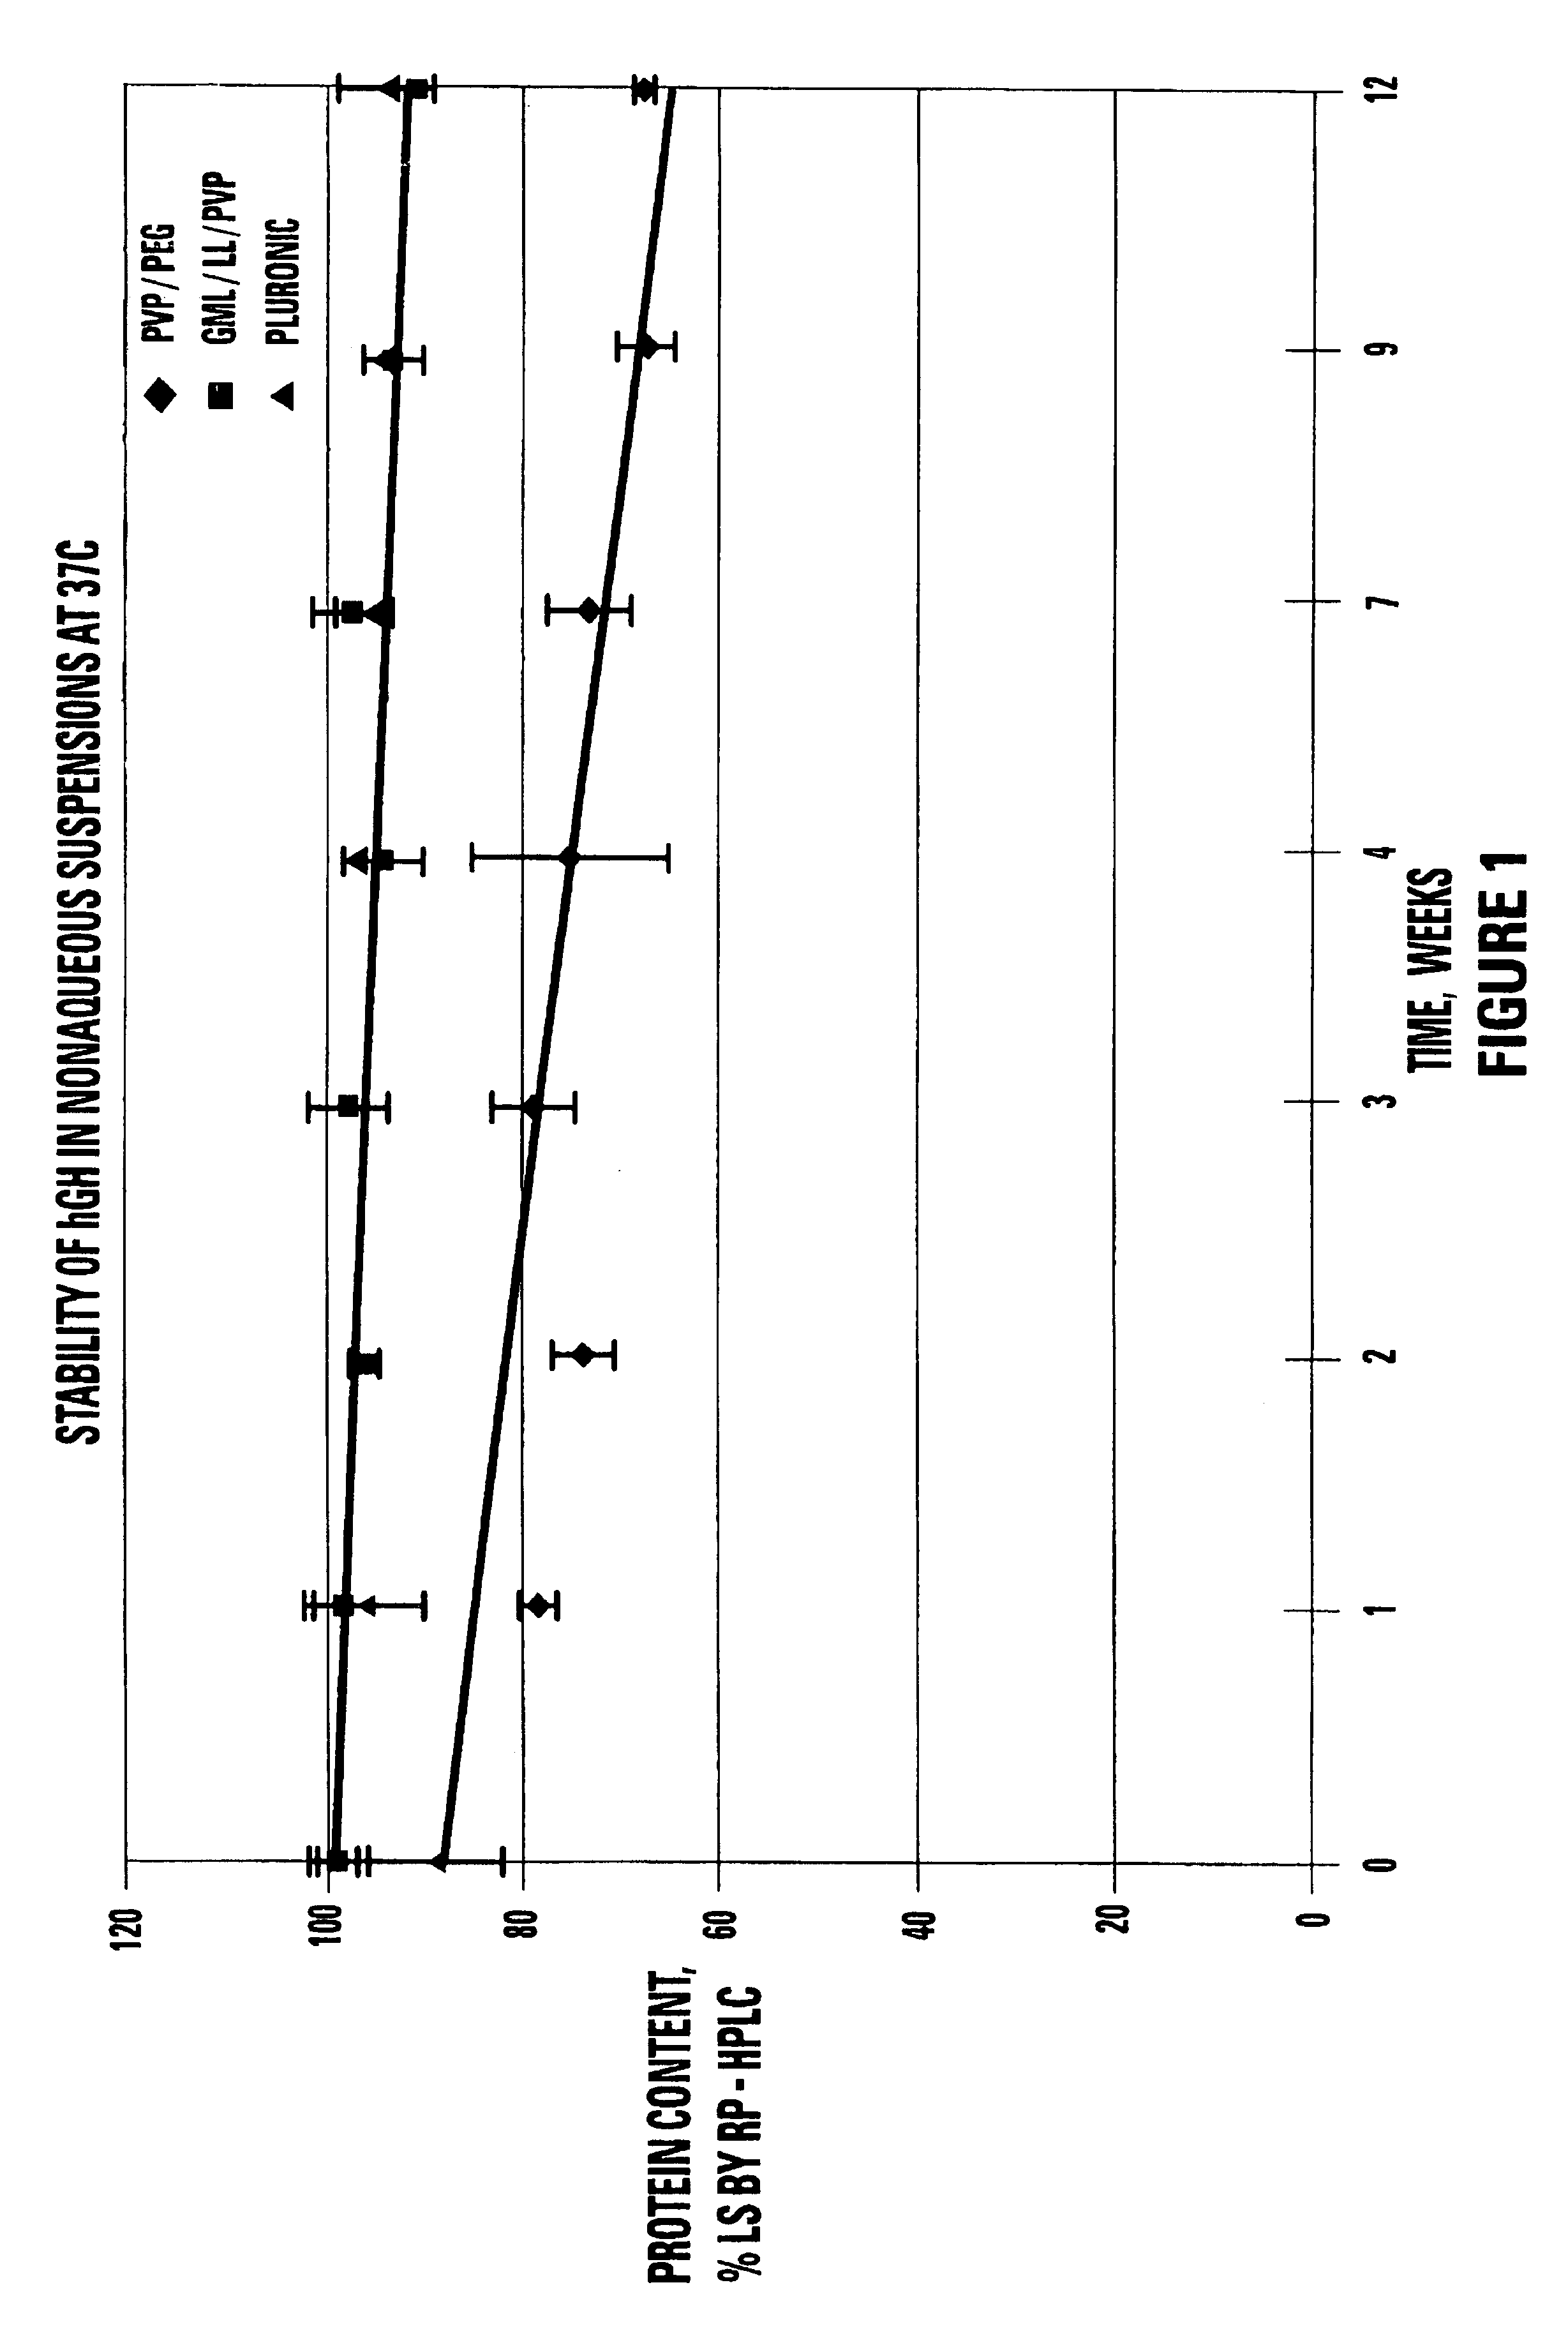 Stable non-aqueous single phase viscous vehicles and formulations utilizing such vehicle